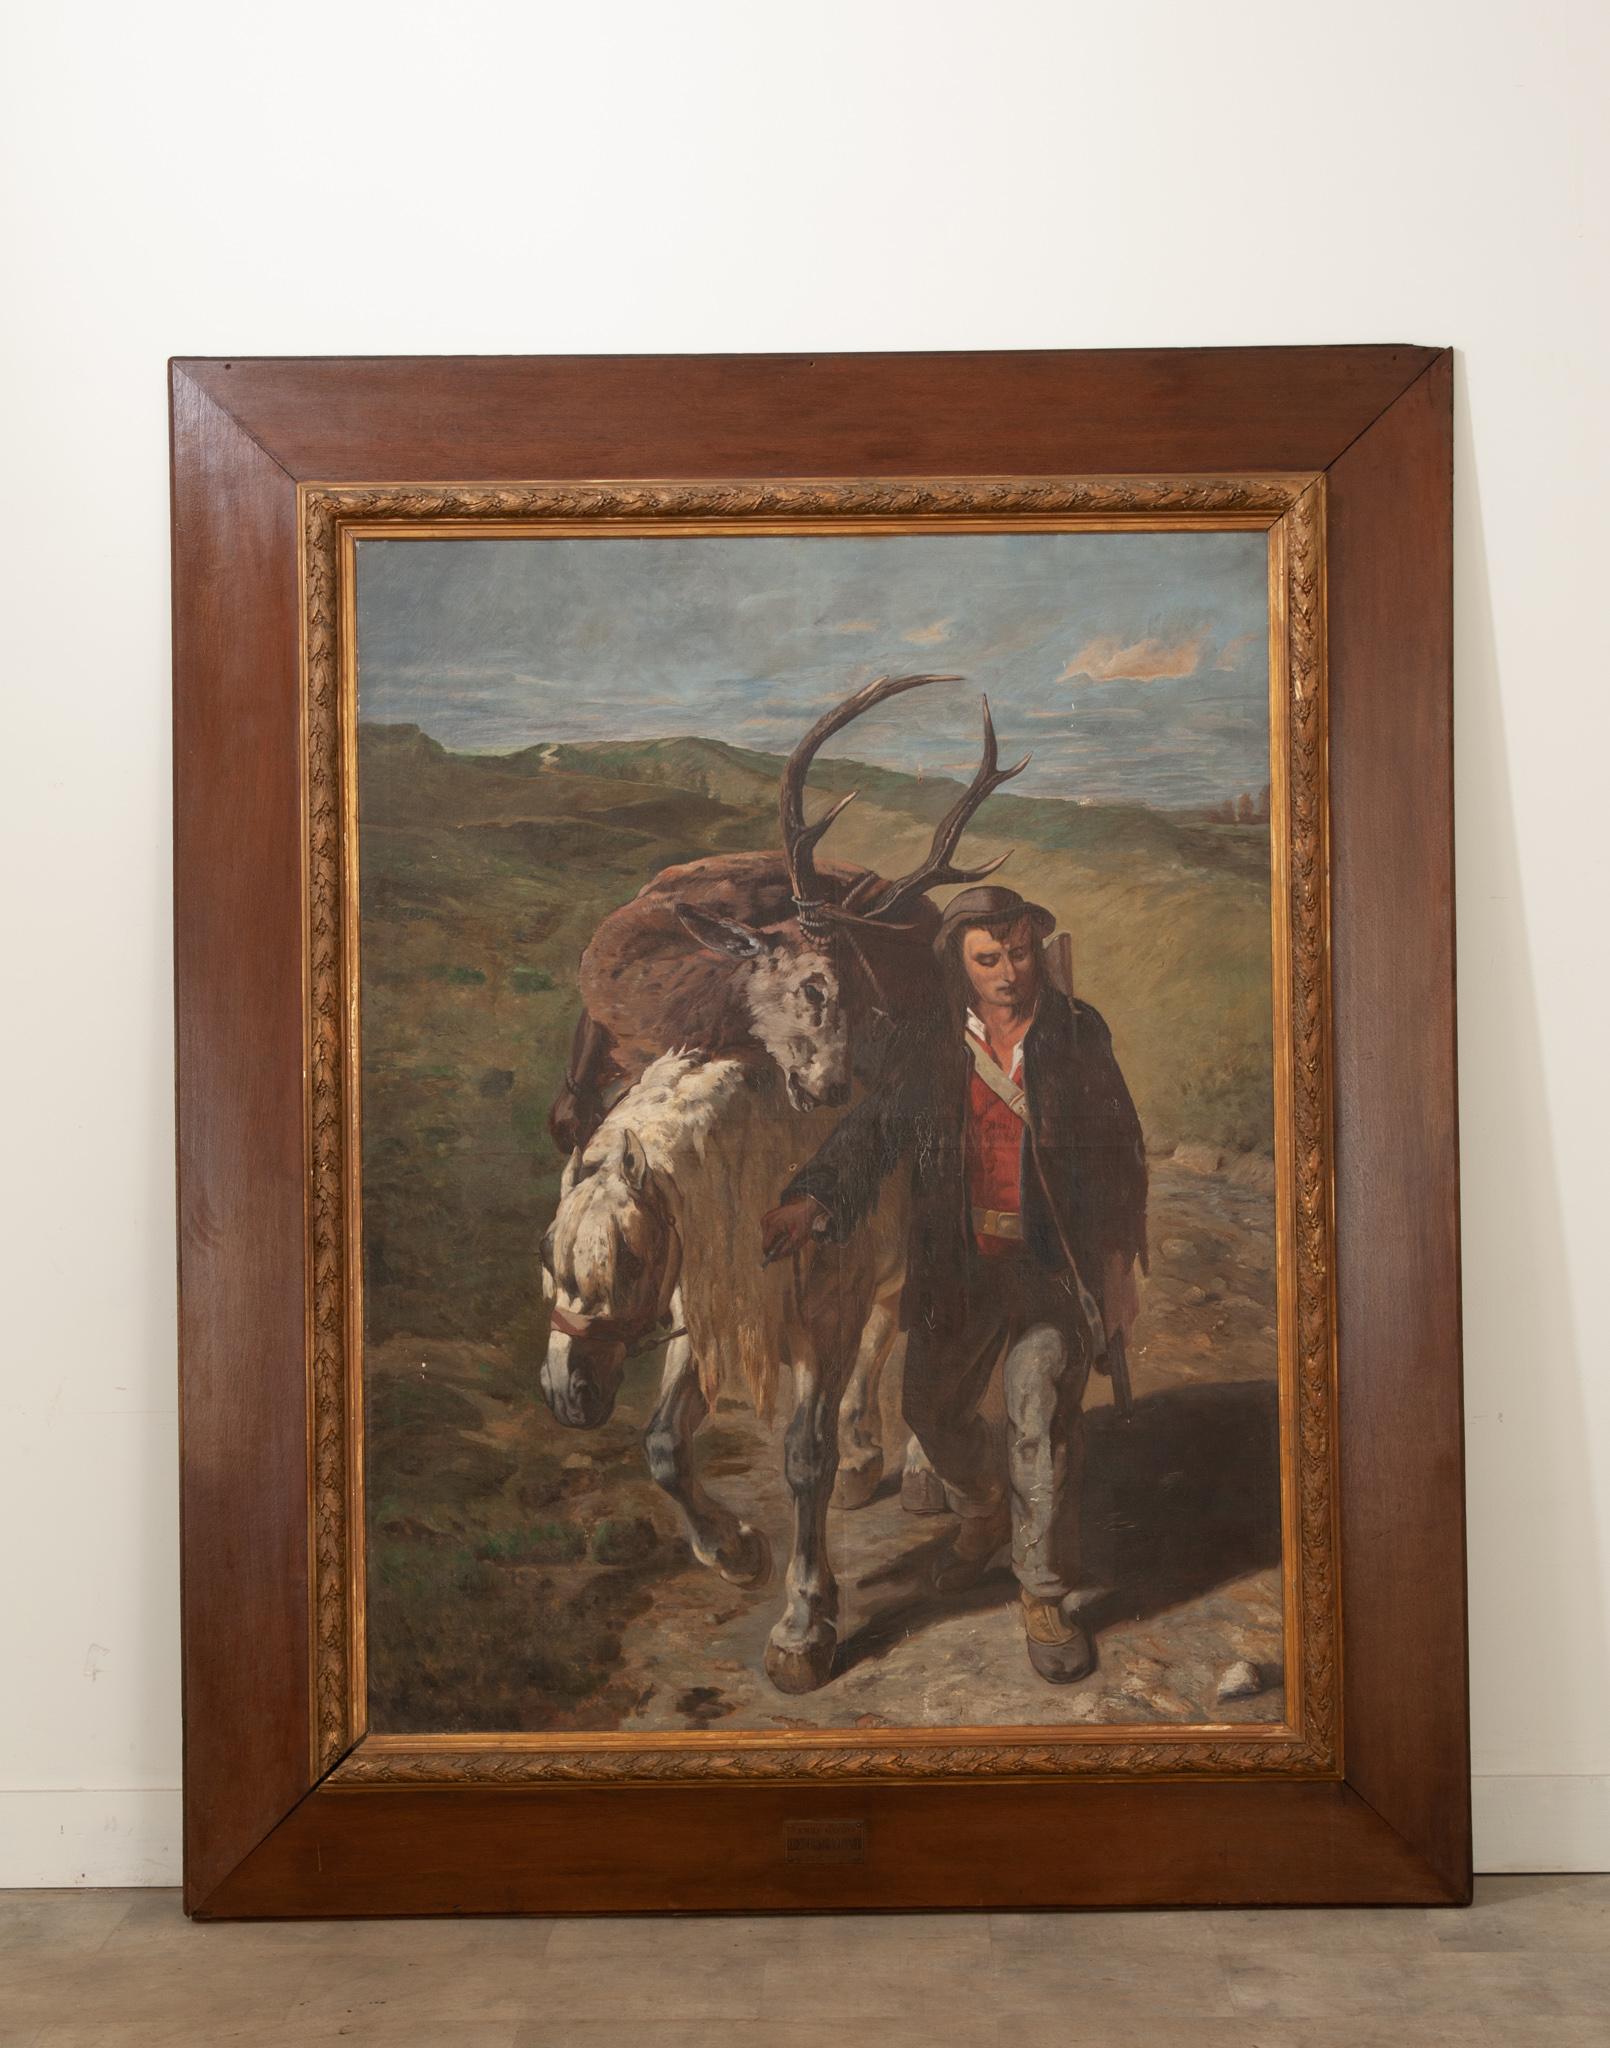 Sporting Art “The Return of the Poacher” by Emile David For Sale